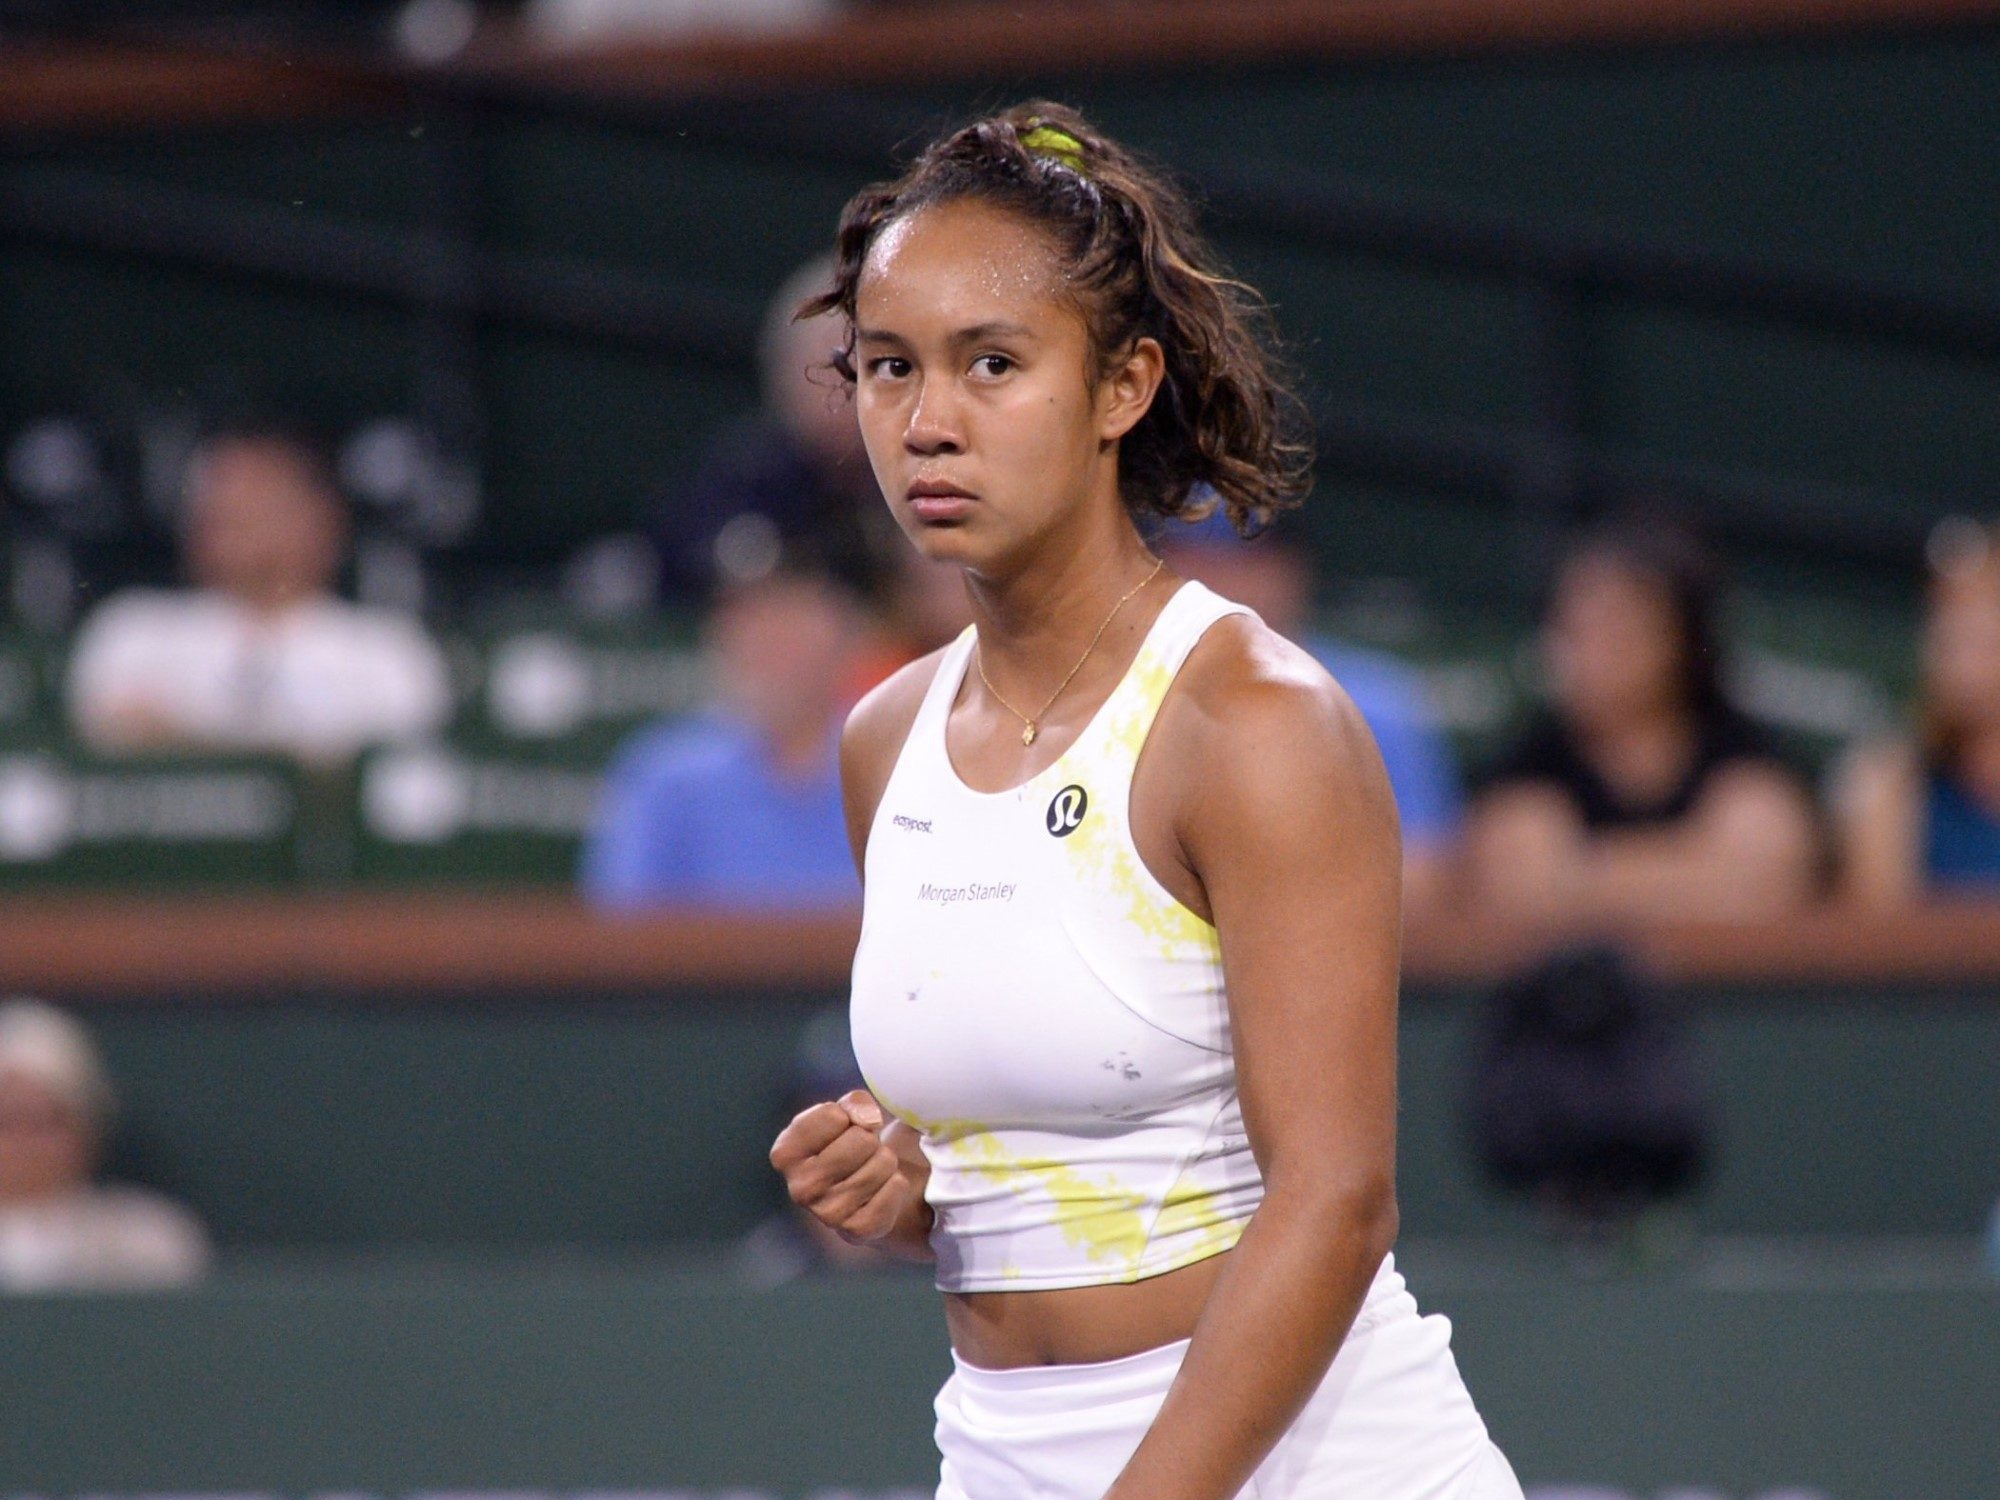 Indian Wells Leylah Annie Fernandez reaches the fourth round for the